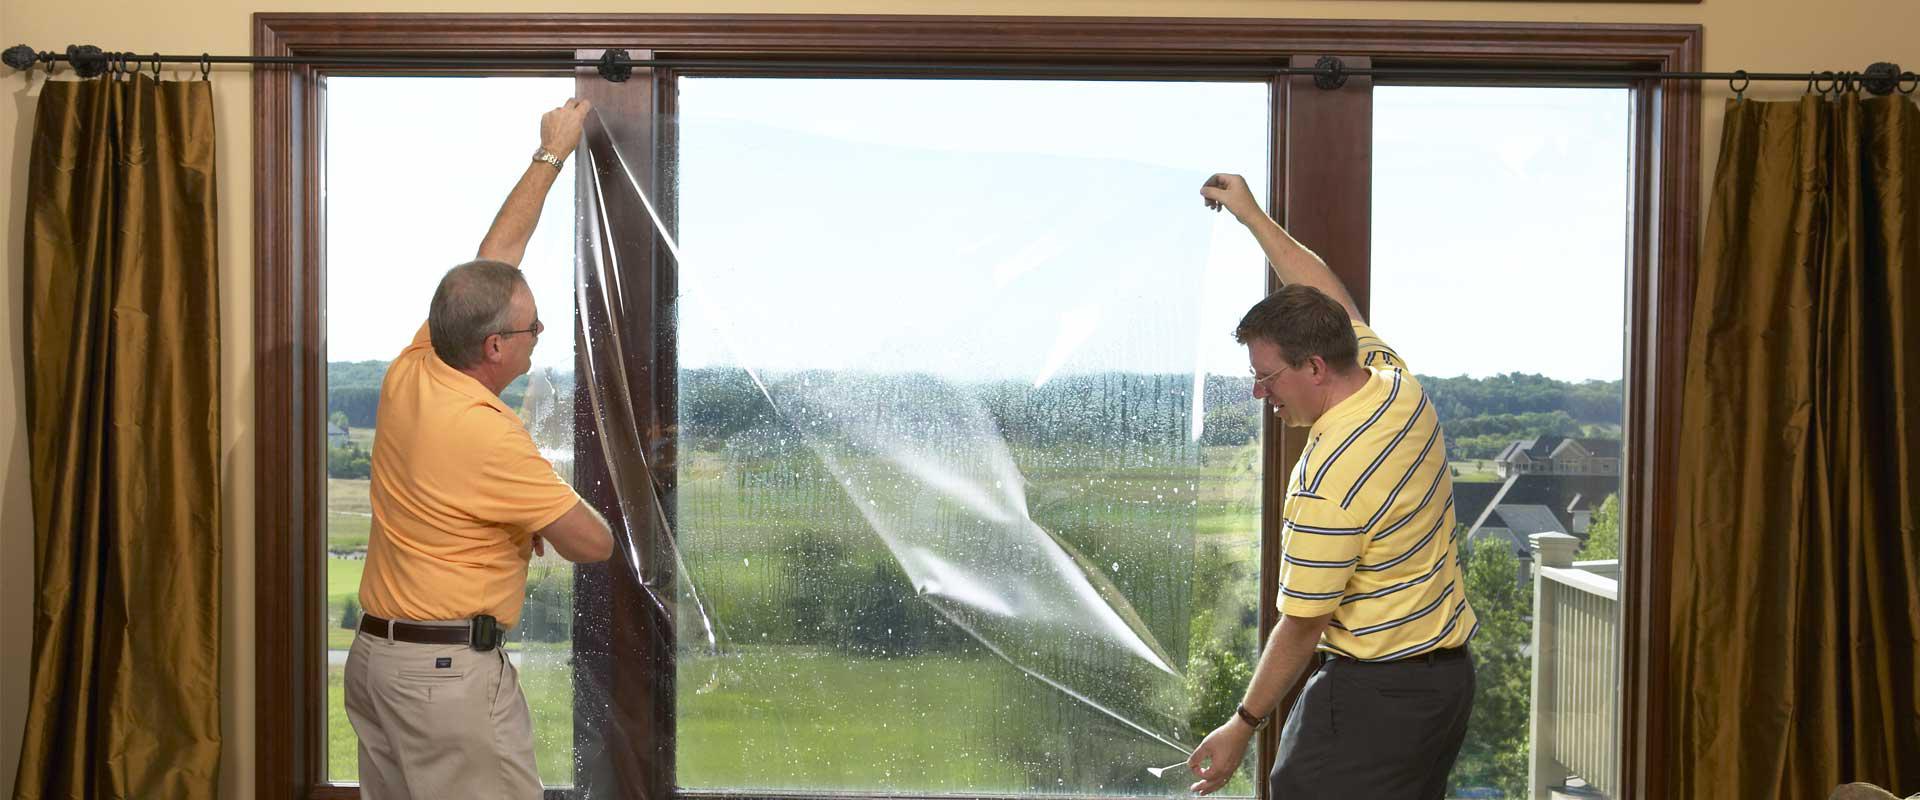 Our commercial window tinting services are a great way to enjoy a more comfortable indoor working environment in Denver and the Lake Norman area.